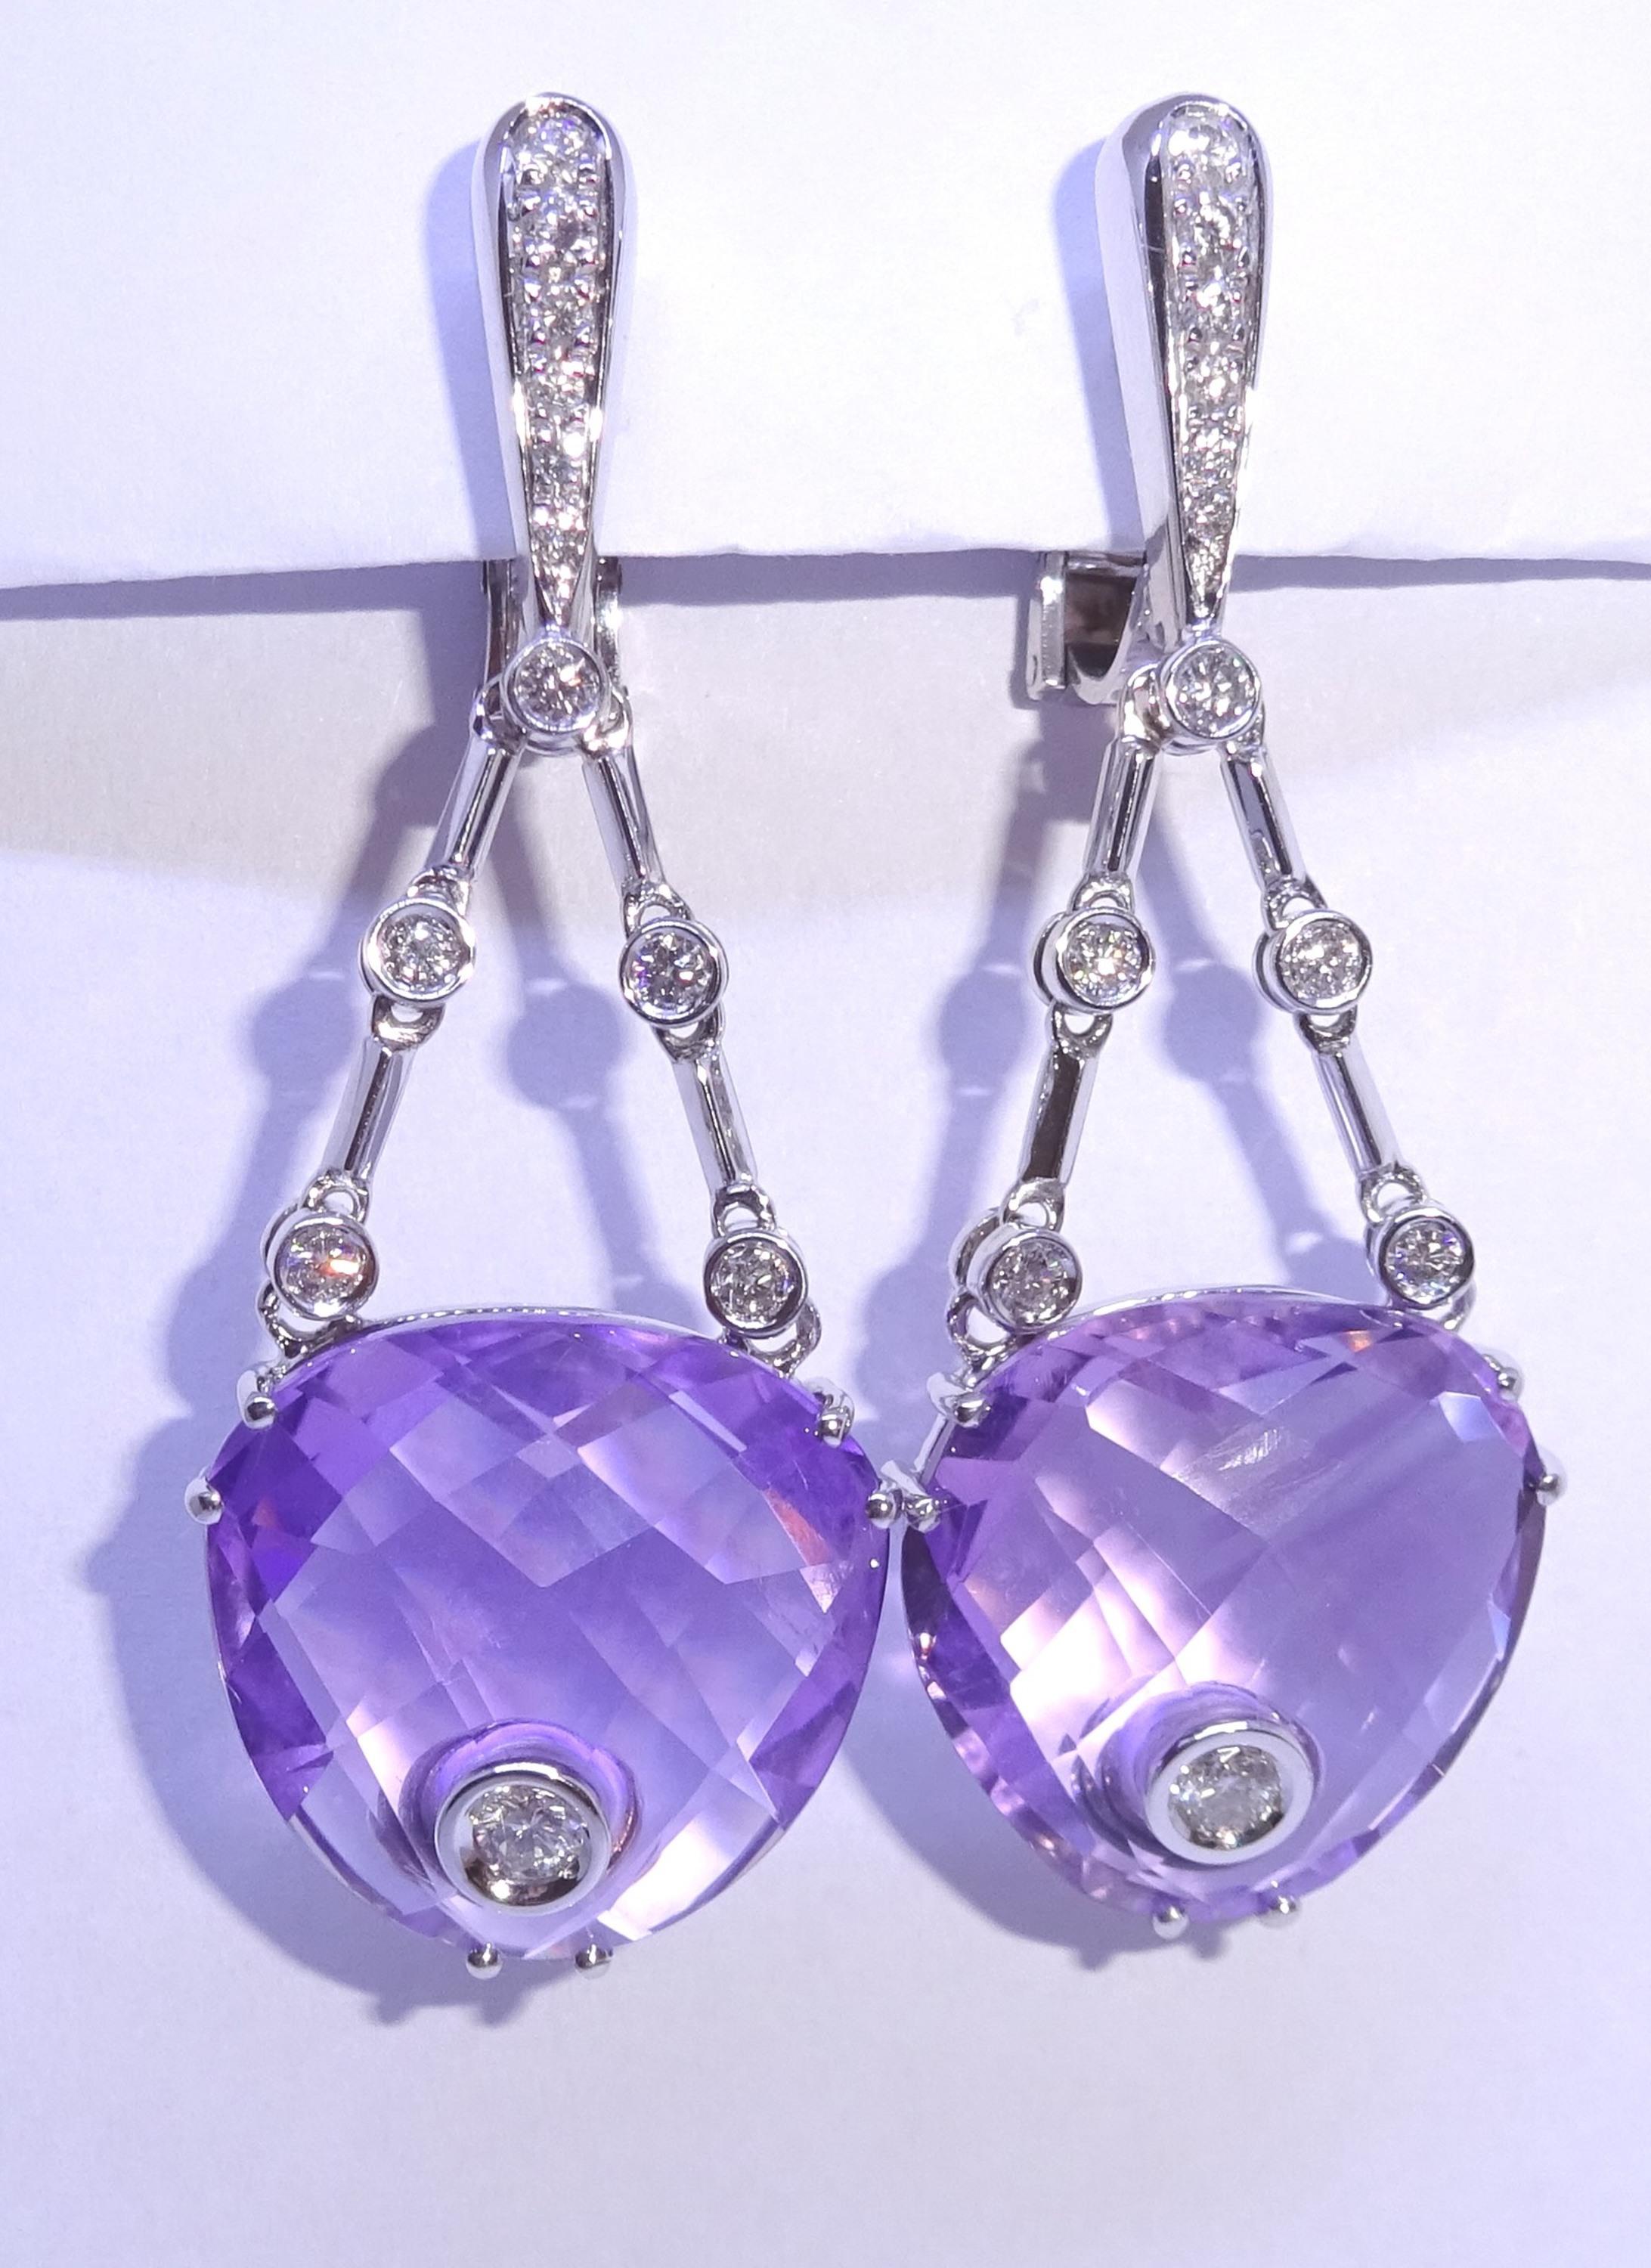 18 Karat White Gold Diamond and Amethyst Dangle Earrings


24 Diamonds 0.65 Carat
2 Amethyst 31.41 Carat



Founded in 1974, Gianni Lazzaro is a family-owned jewelery company based out of Düsseldorf, Germany.
Although rooted in Germany, Gianni